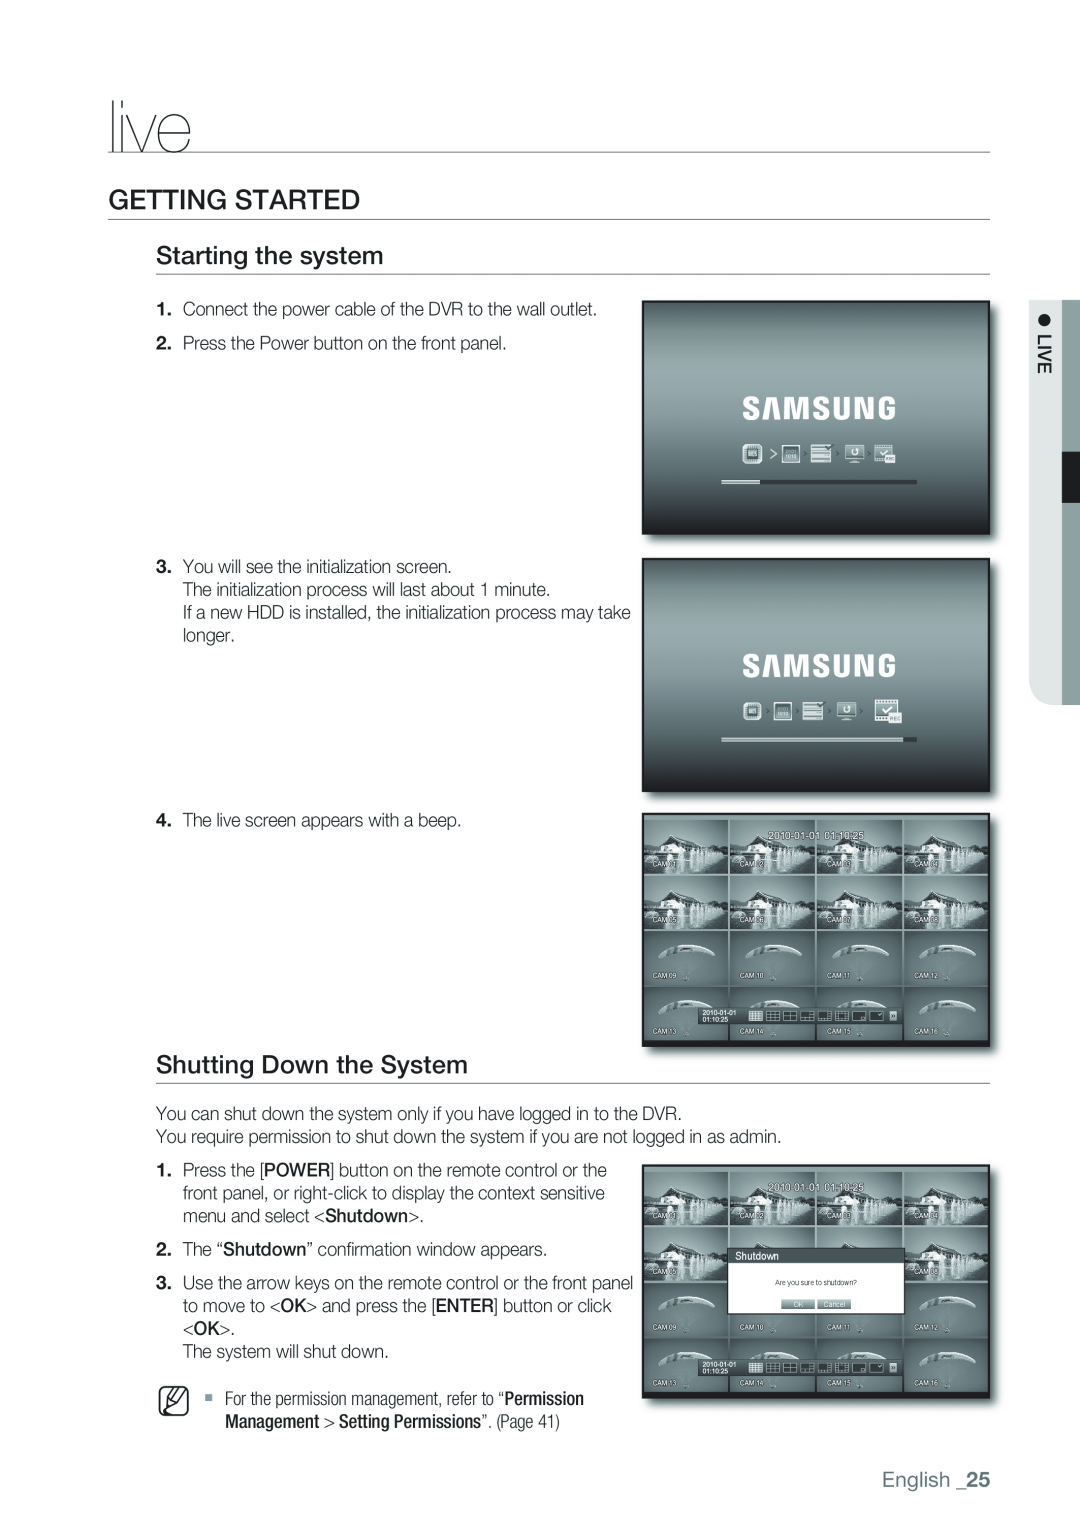 Samsung SRD-1610D, 870D, 1670D, 1650D live, Getting Started, Starting the system, Shutting Down the System, English 